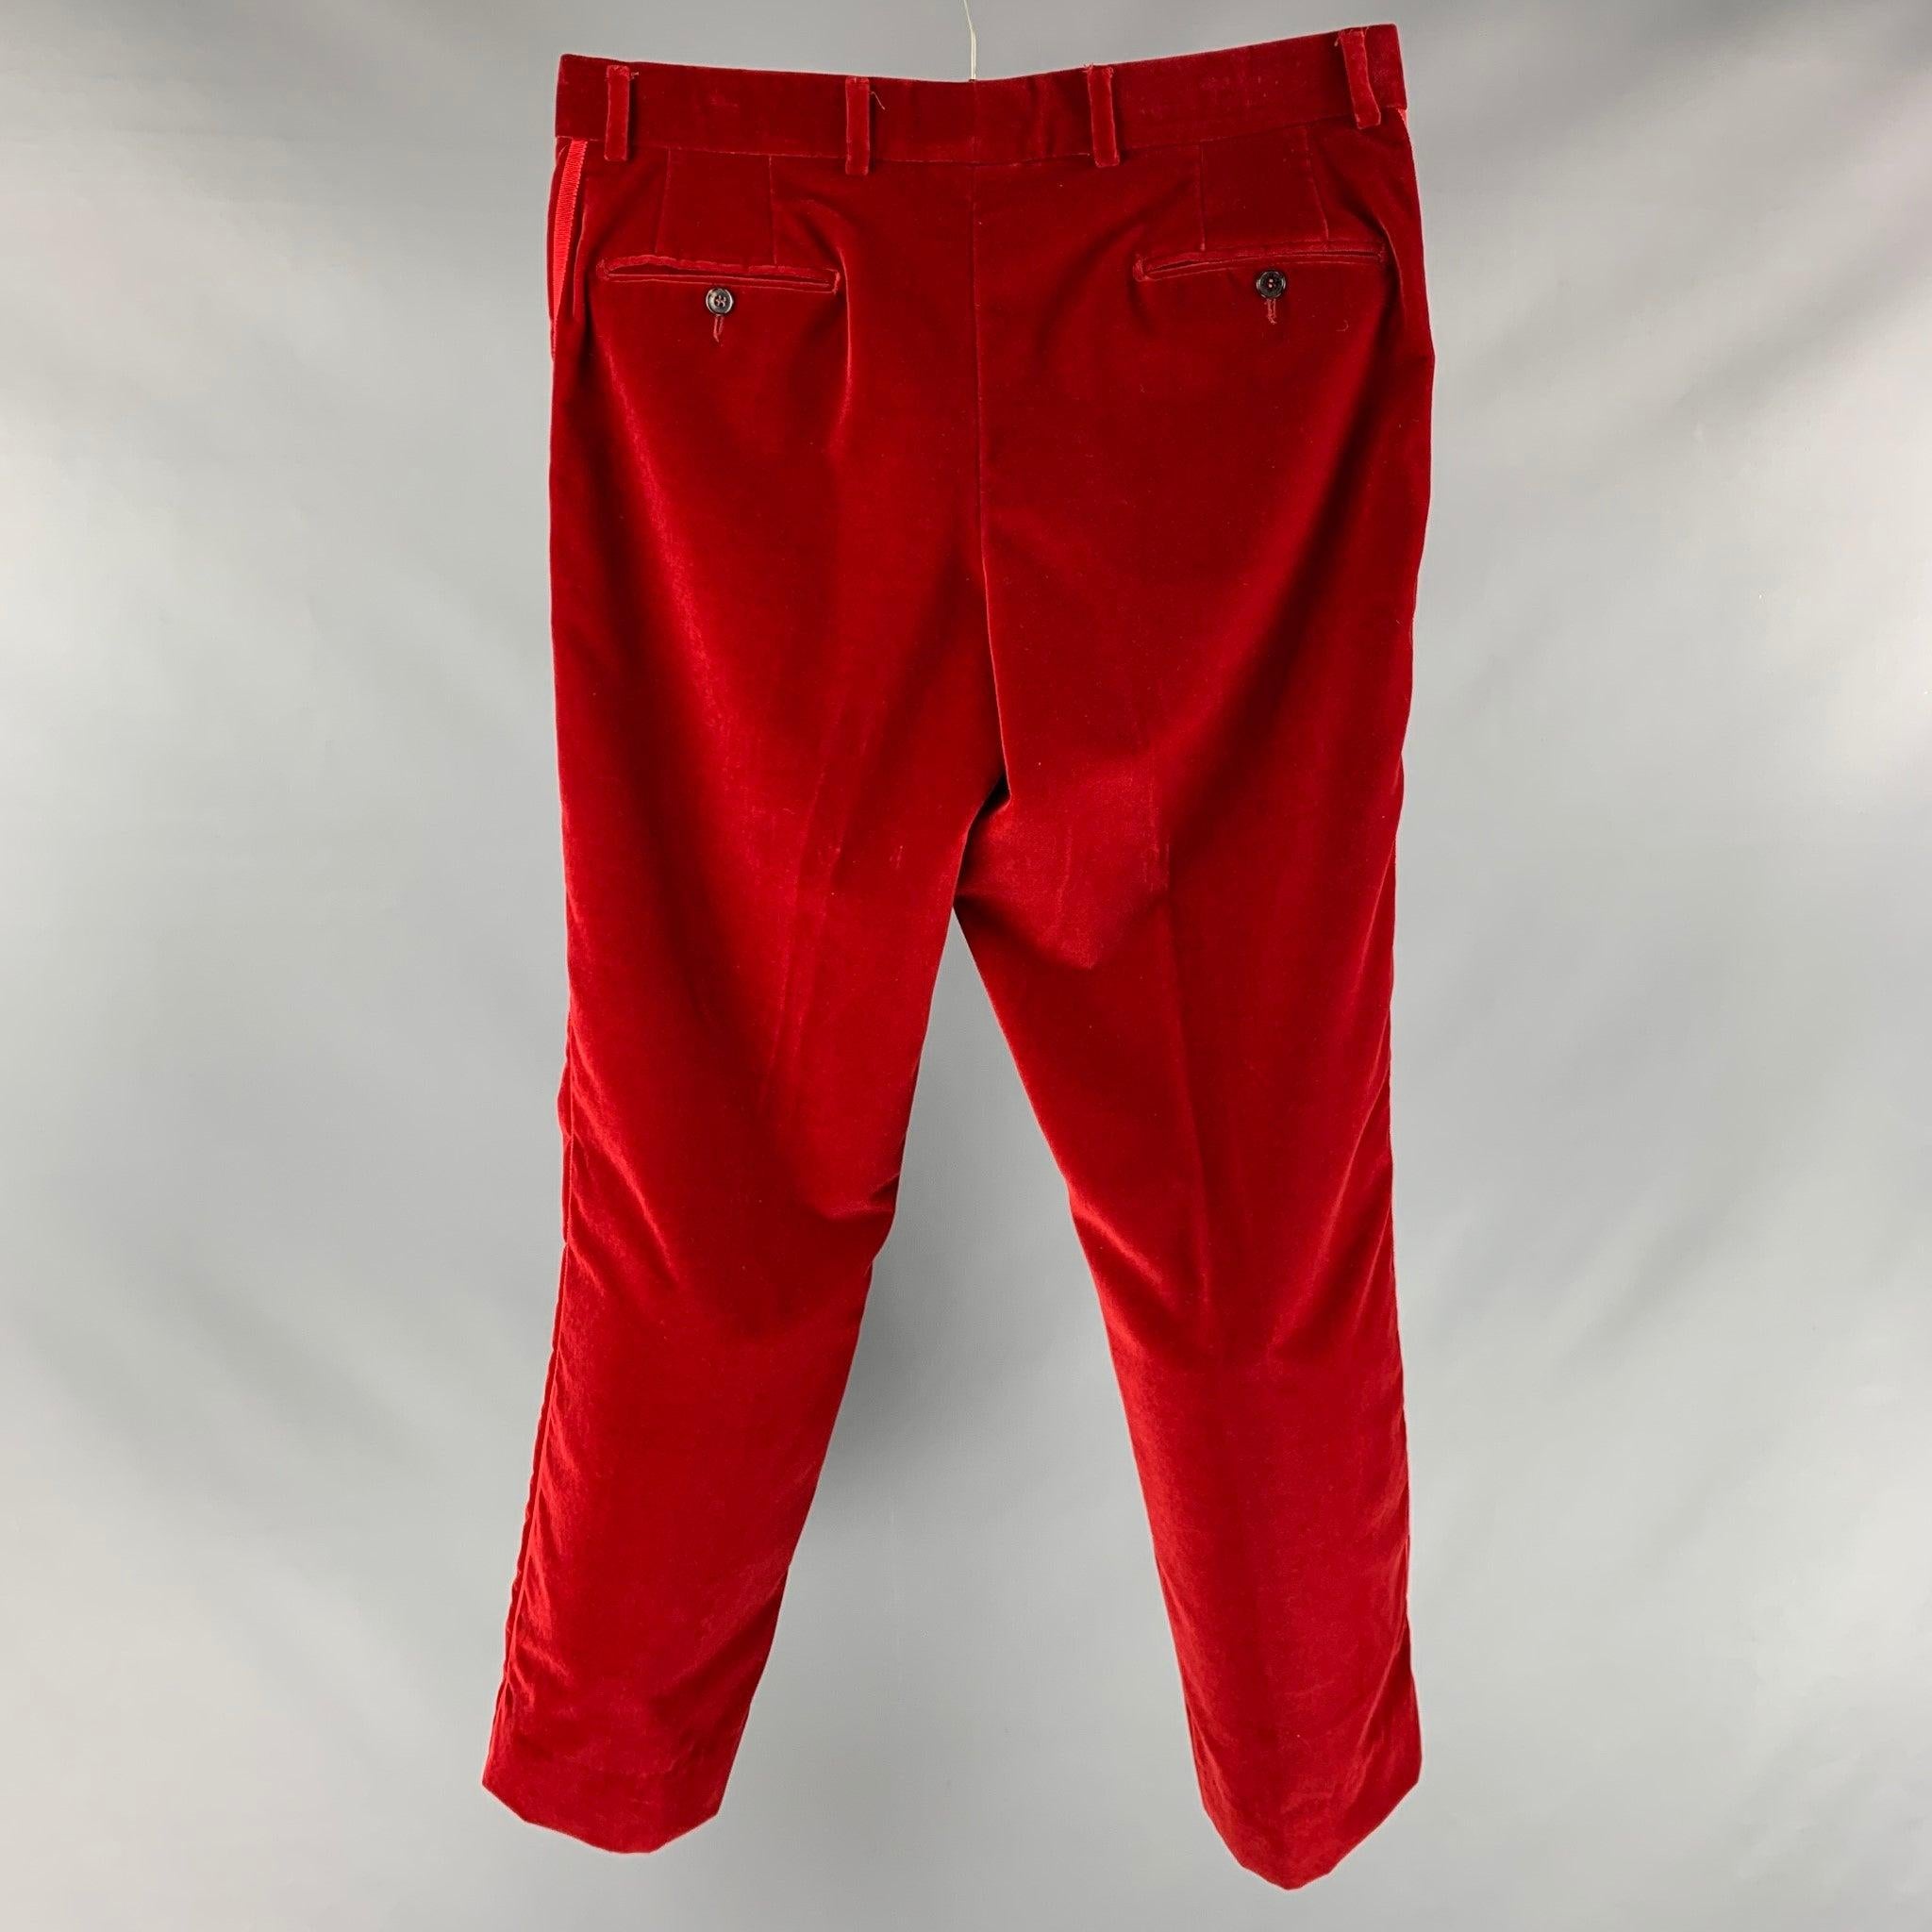 ETRO dress pants comes in a red velvet material featuring a flat front, red gross grain ribbon detail, regular fit, front tab, and a zip fly closure. Made in Italy.Excellent Pre- Owned Condition. 

Marked:  54 

Measurements: 
 Waist: 38 inches